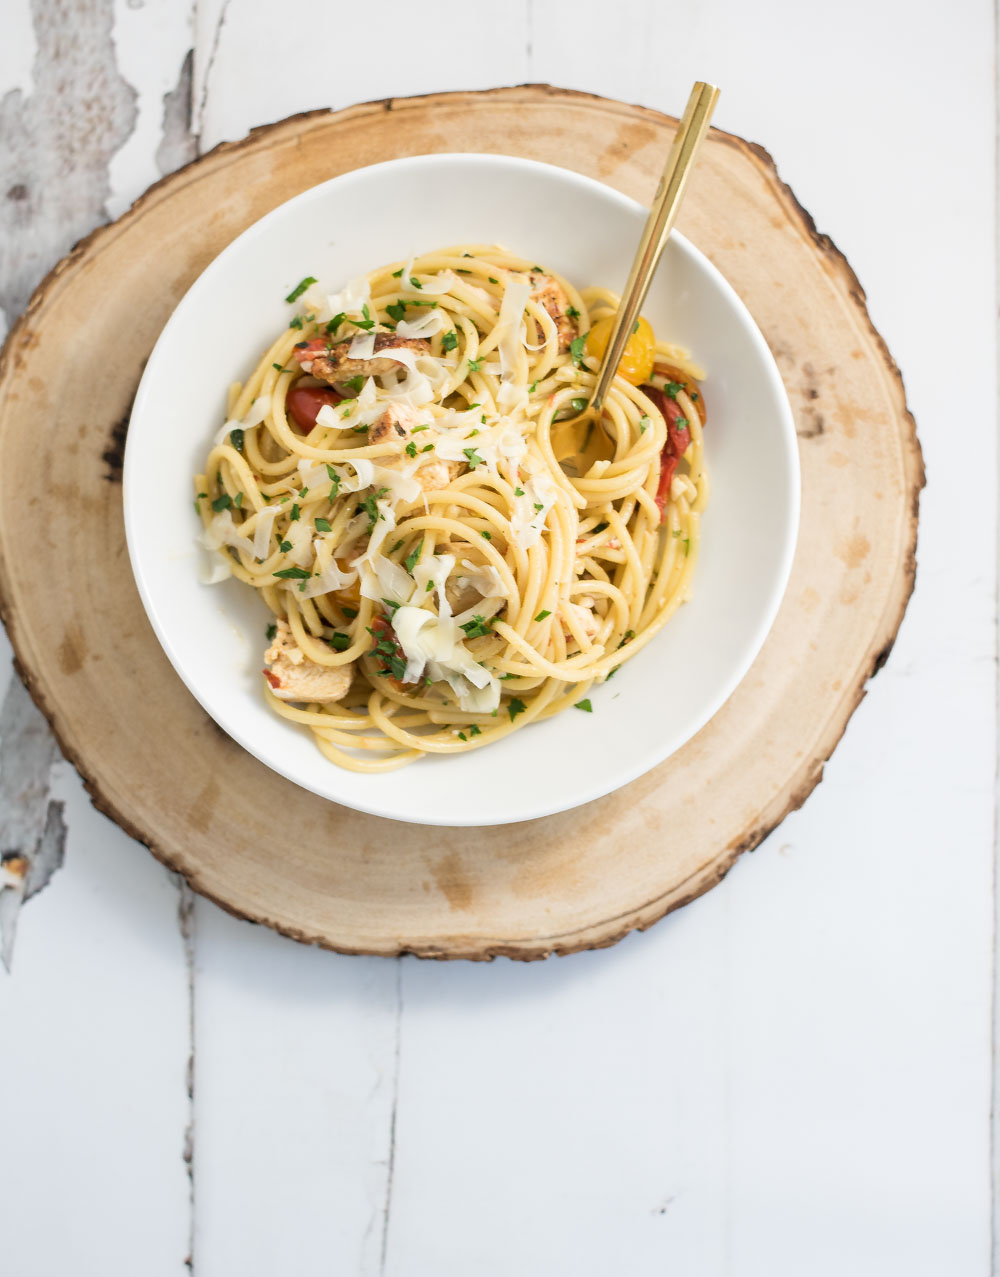 This garlic bucatini with blistered tomatoes and spicy chicken is a pasta-lover's dream. It is packed full of light and delicious flavor!